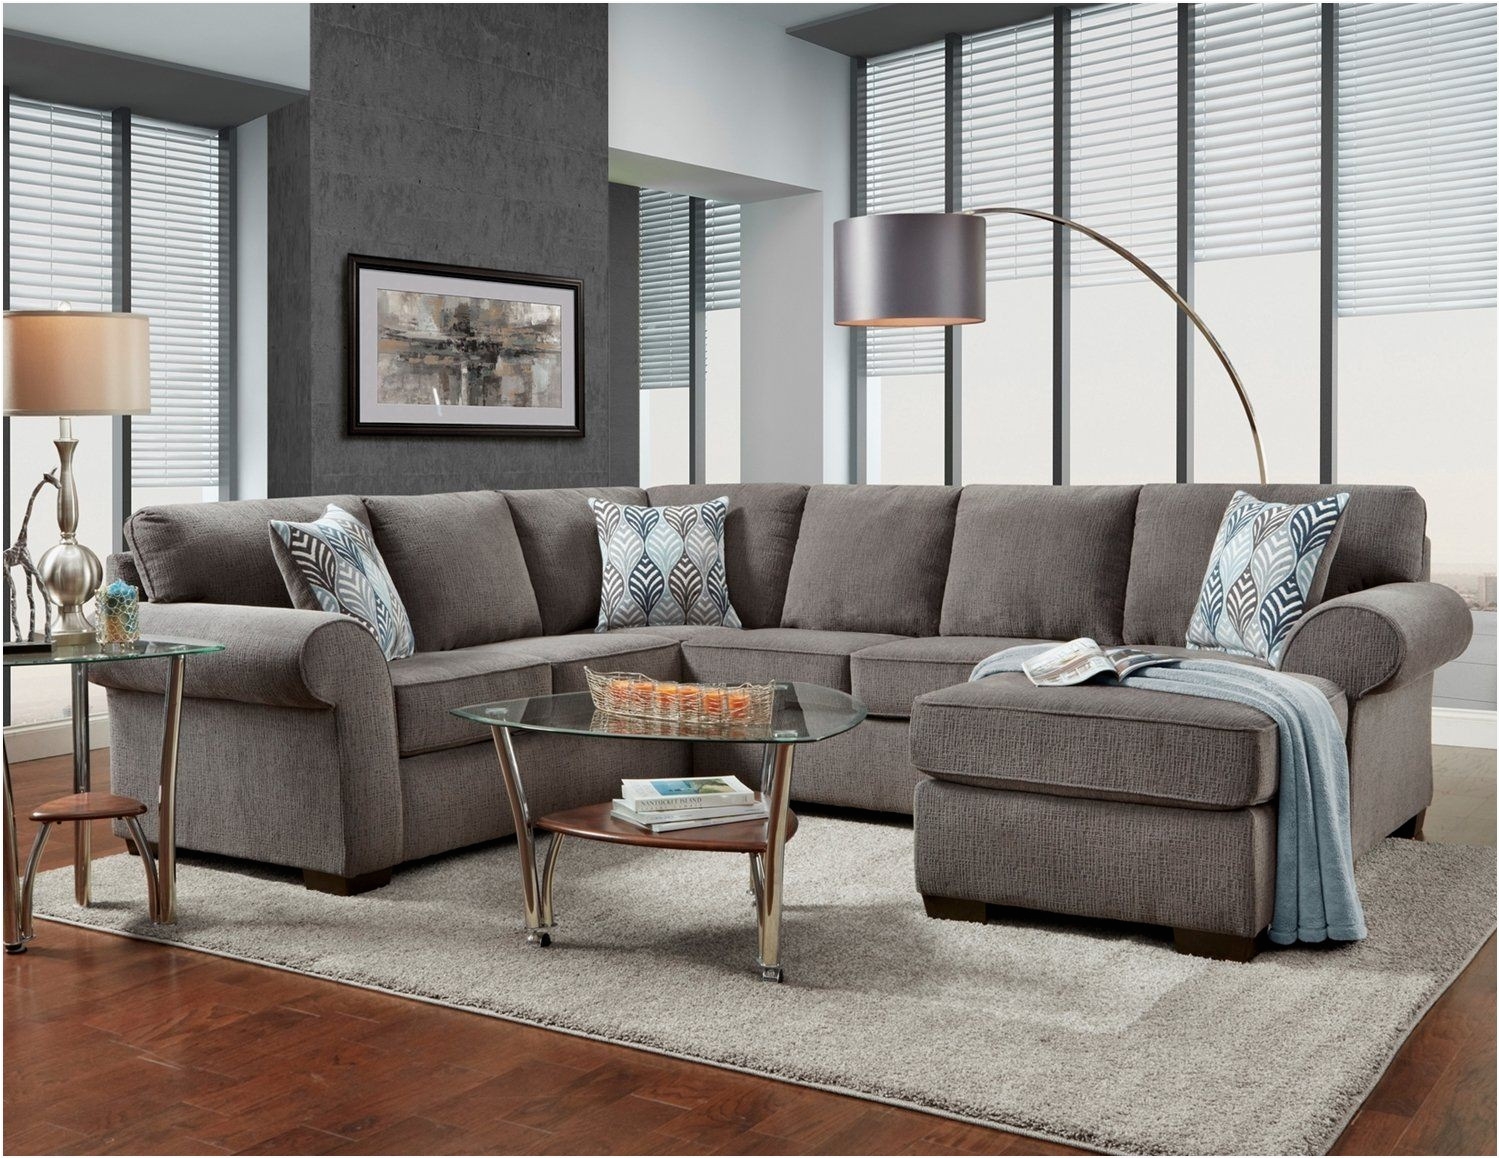 discount furniture memphis tn fresh home design cheap furniture stores in memphis tn new affordable gallery